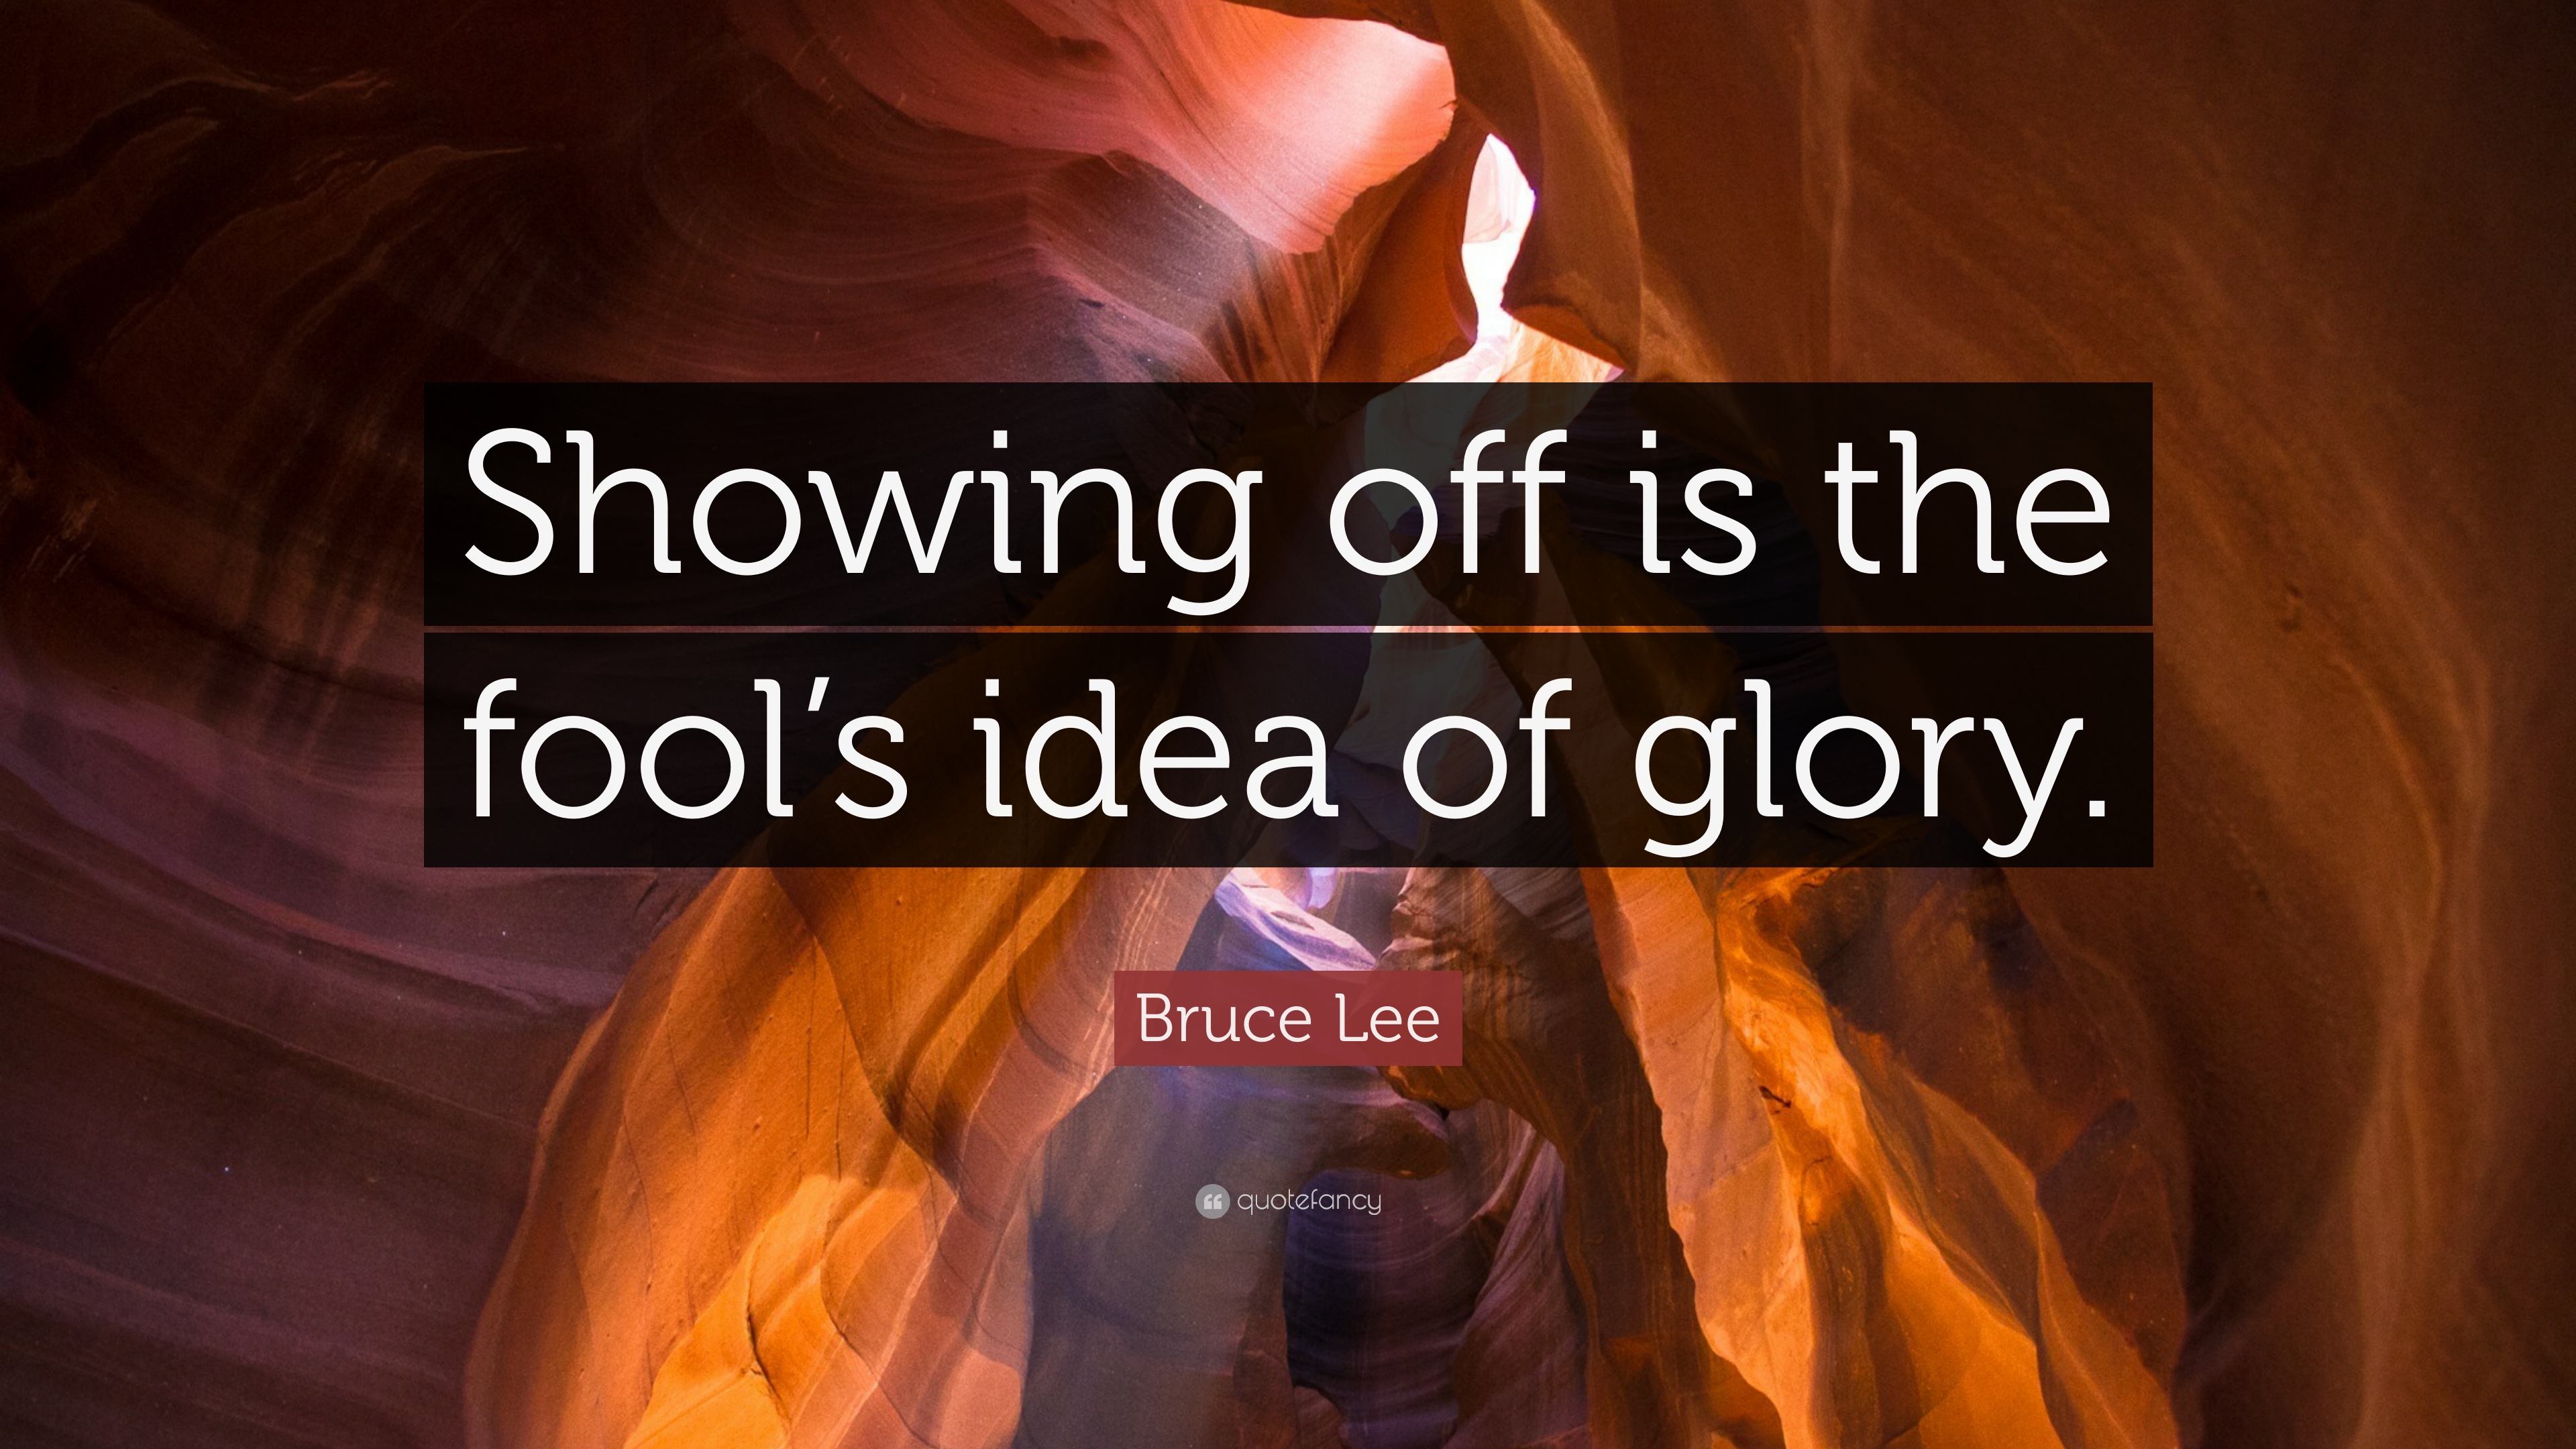 Bruce Lee Quote: “Showing off is the fool's idea of glory.” 12